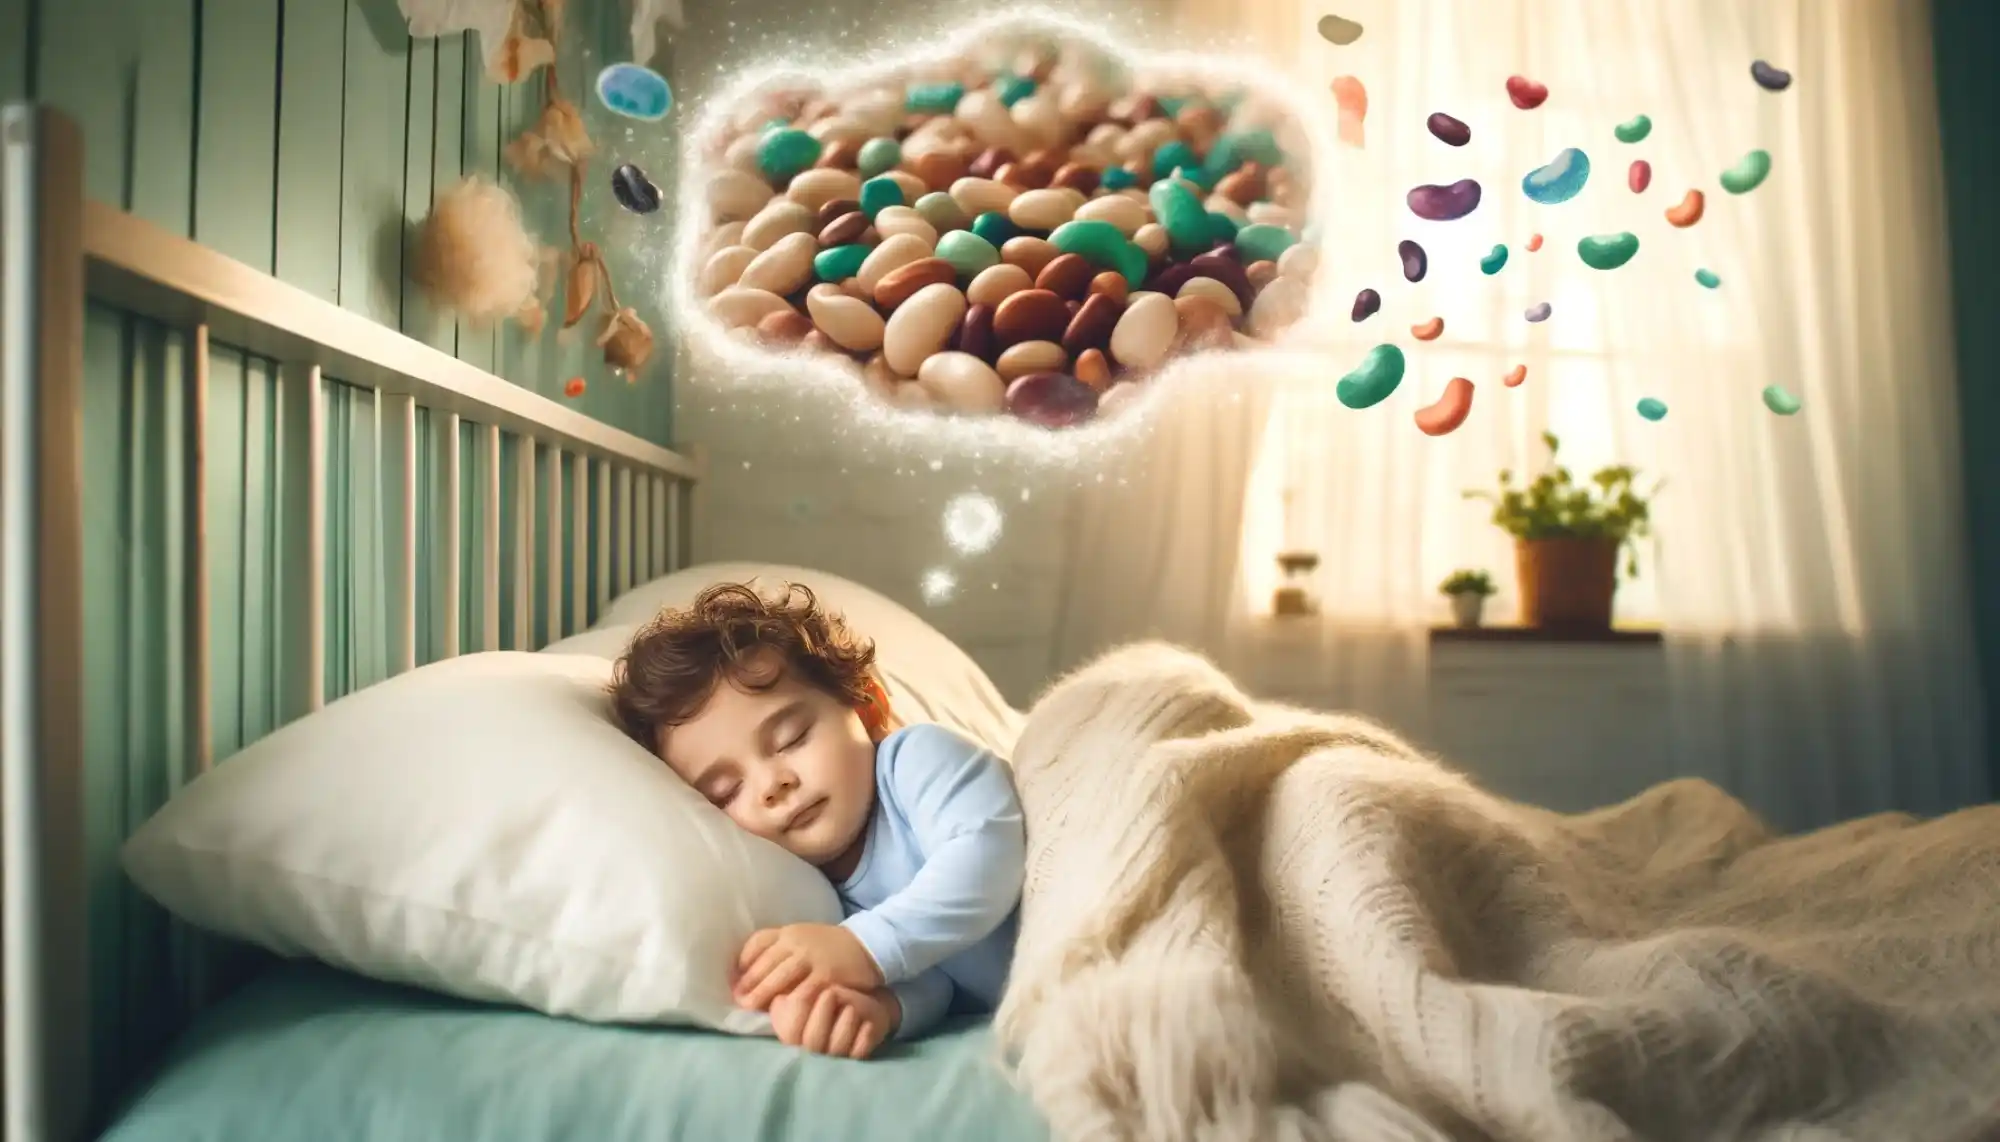 a boy dreaming about beans while he was sleeping in his dream